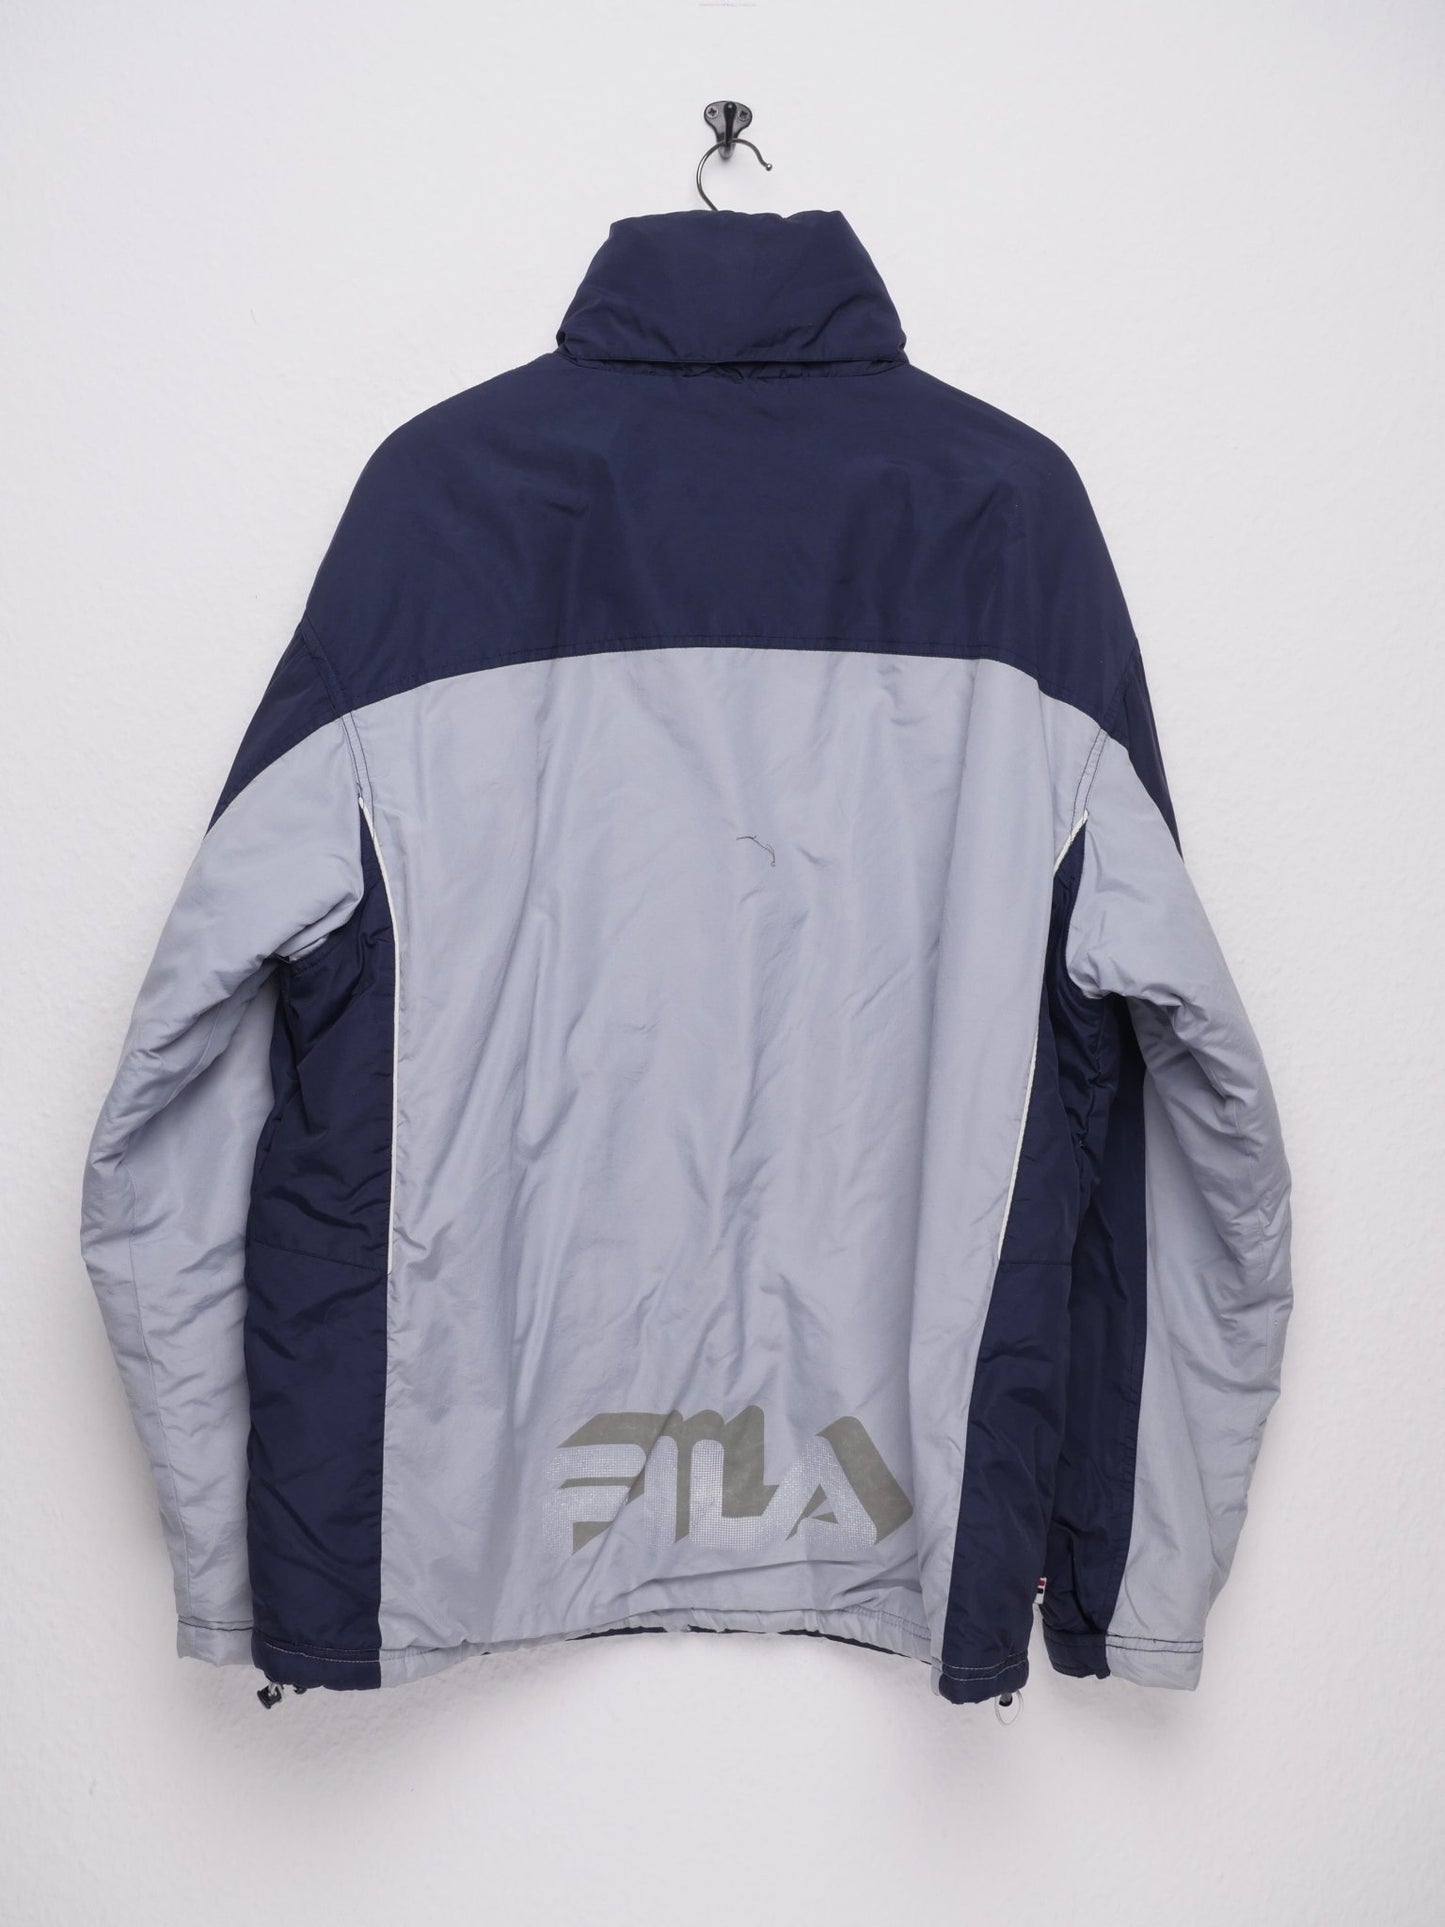 Fila embroidered Spellout two toned Heavy Jacke - Peeces